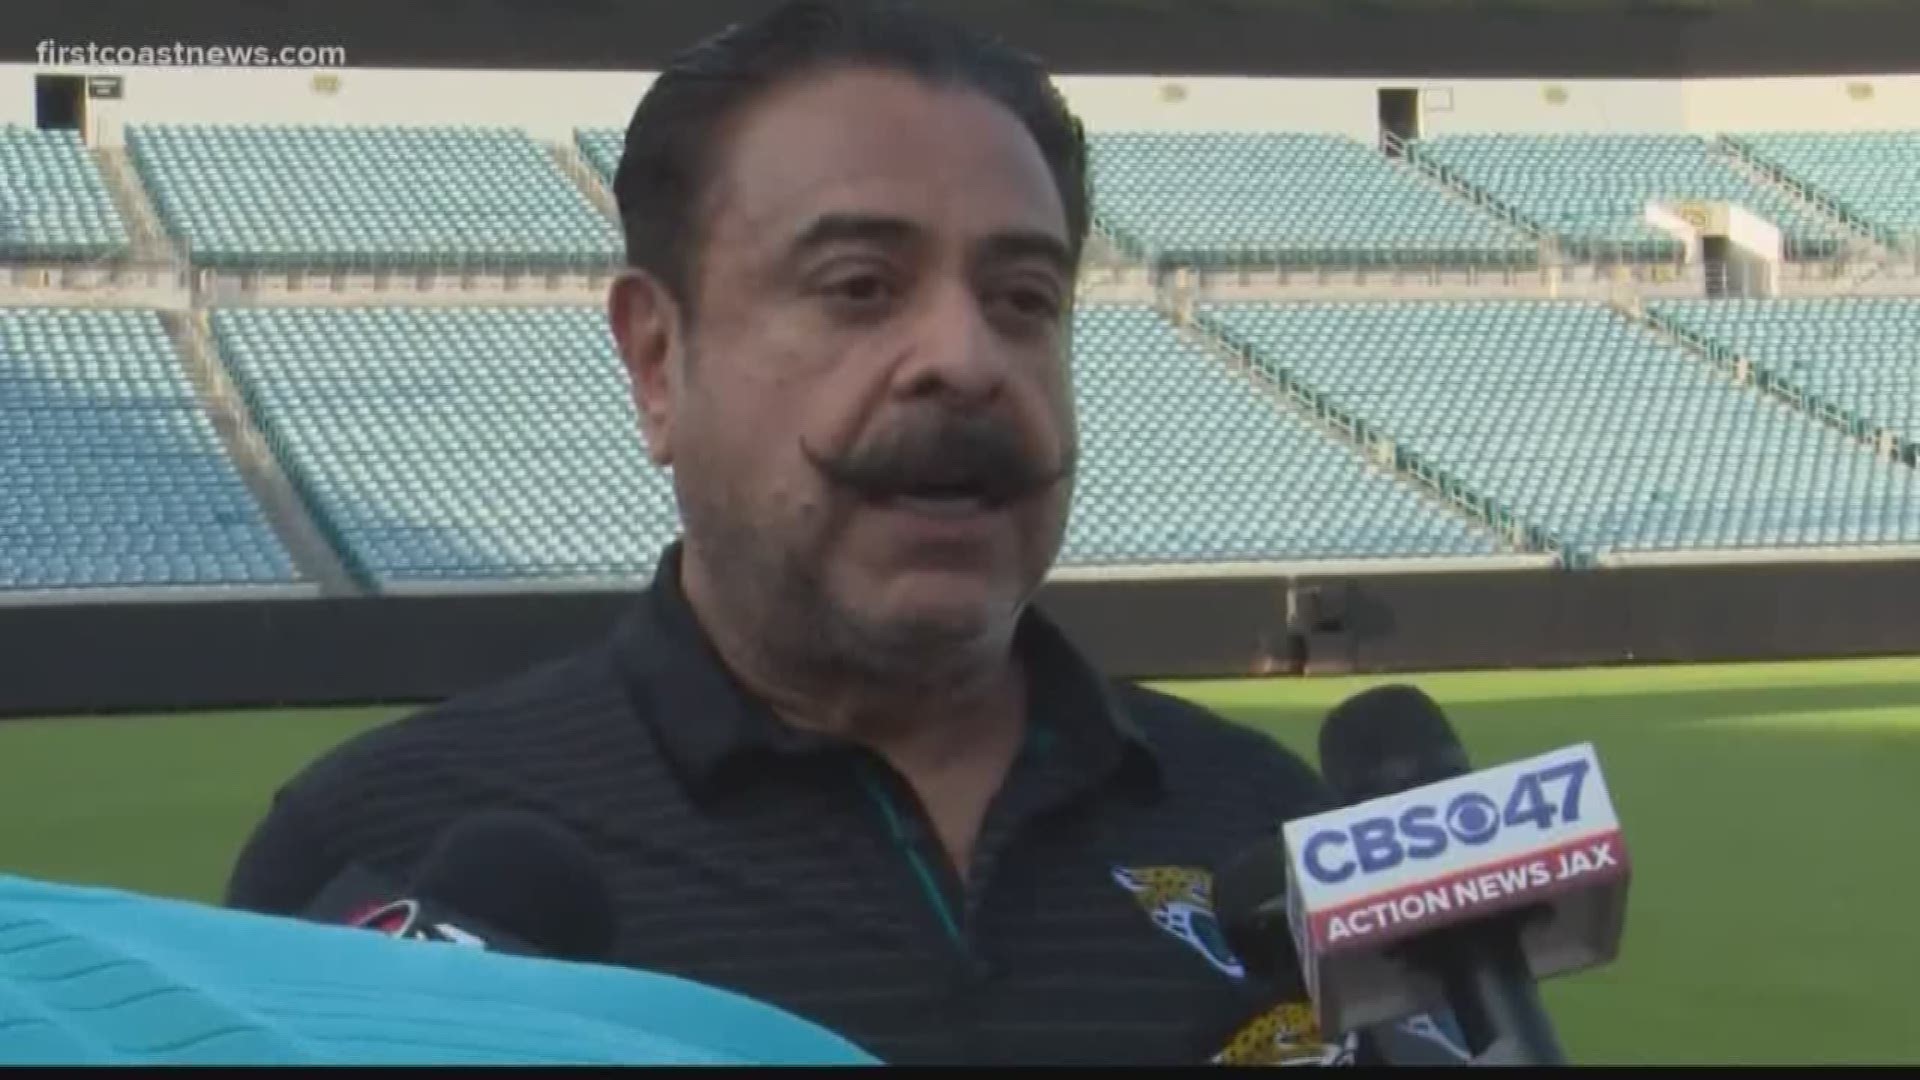 Shad Khan announced that the Jaguars aren't moving, but he is bidding to buy Wembley Stadium in London.